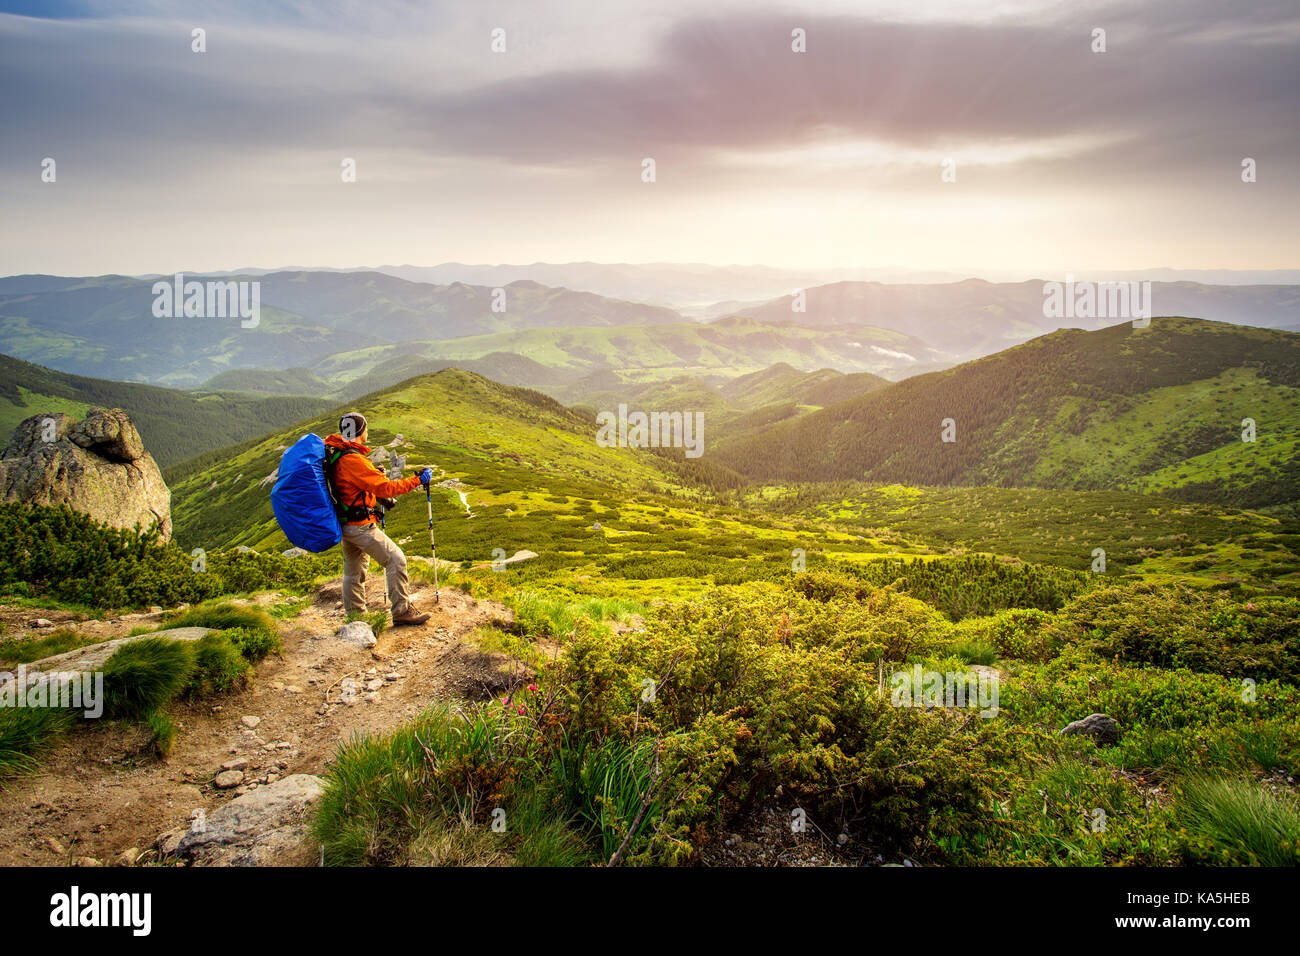 Traveler Man hiking with backpack admiring a beautiful landscape. HDR foto. Stock Photo